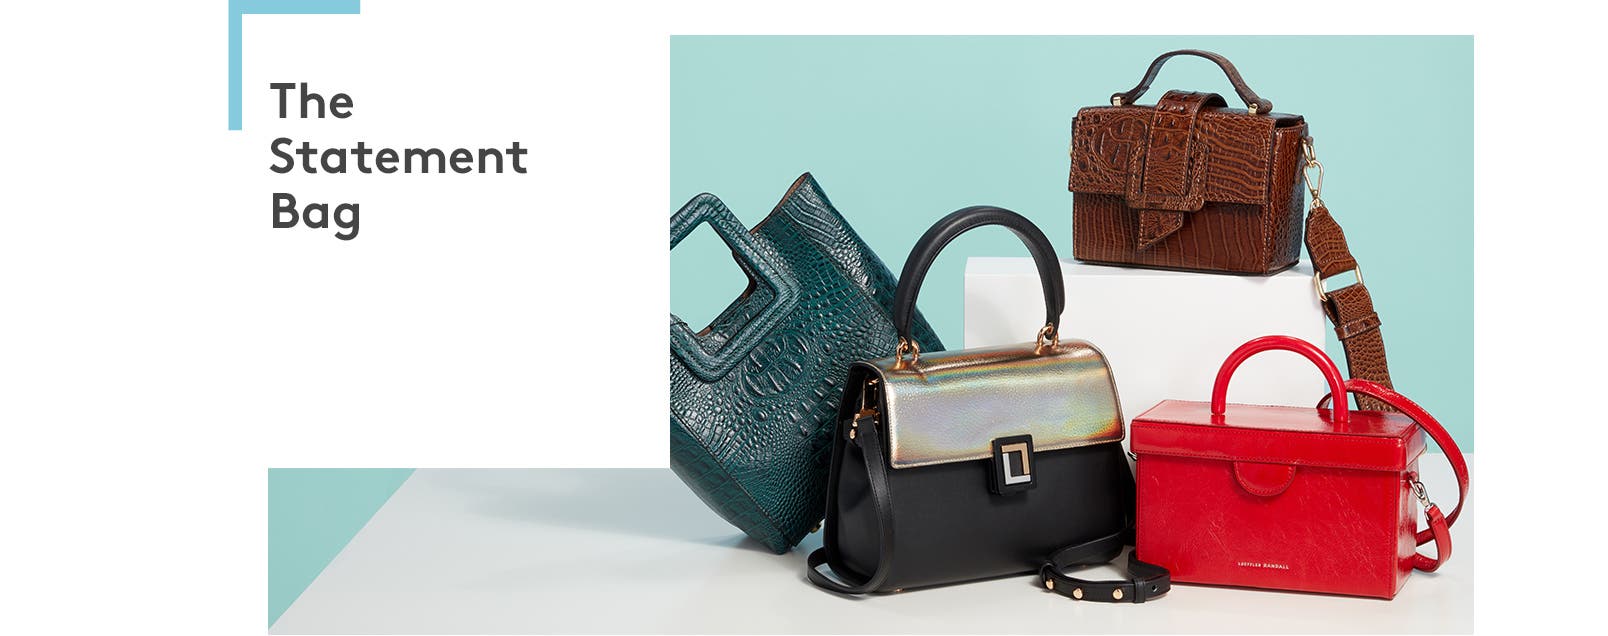 Statement bags including colorful, textured and metallic styles.